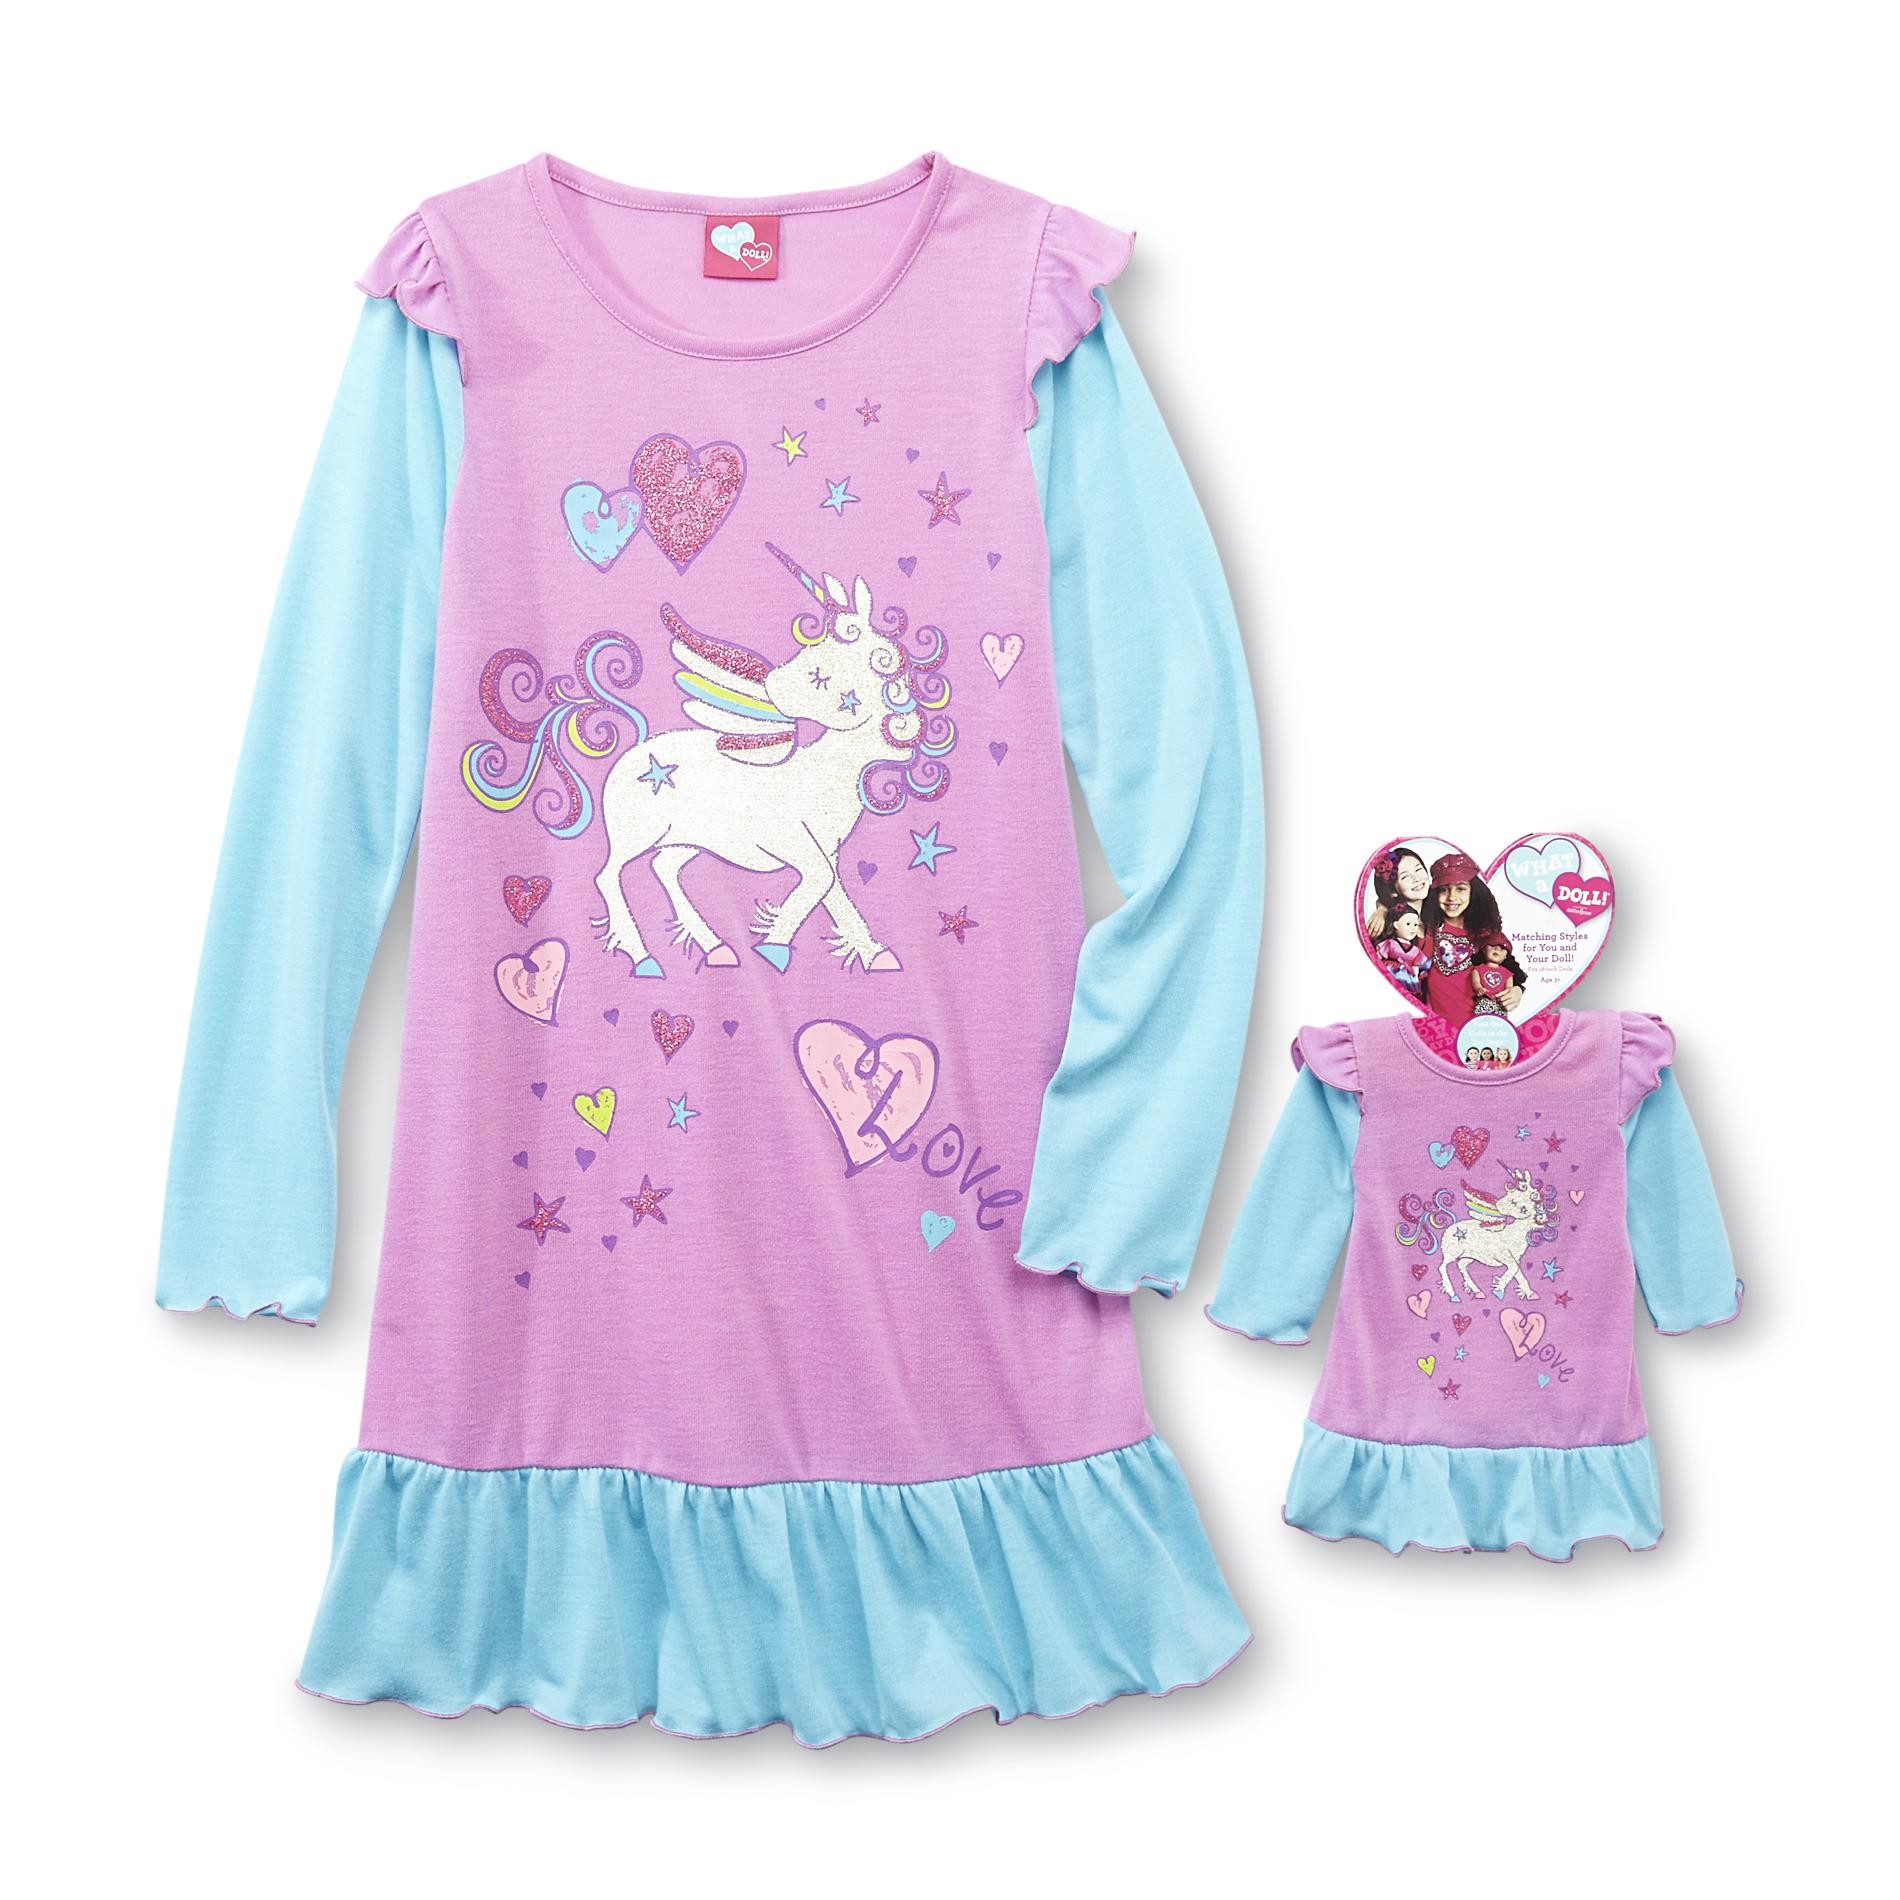 What A Doll Girl's Nightgown & Doll Dress - Unicorn